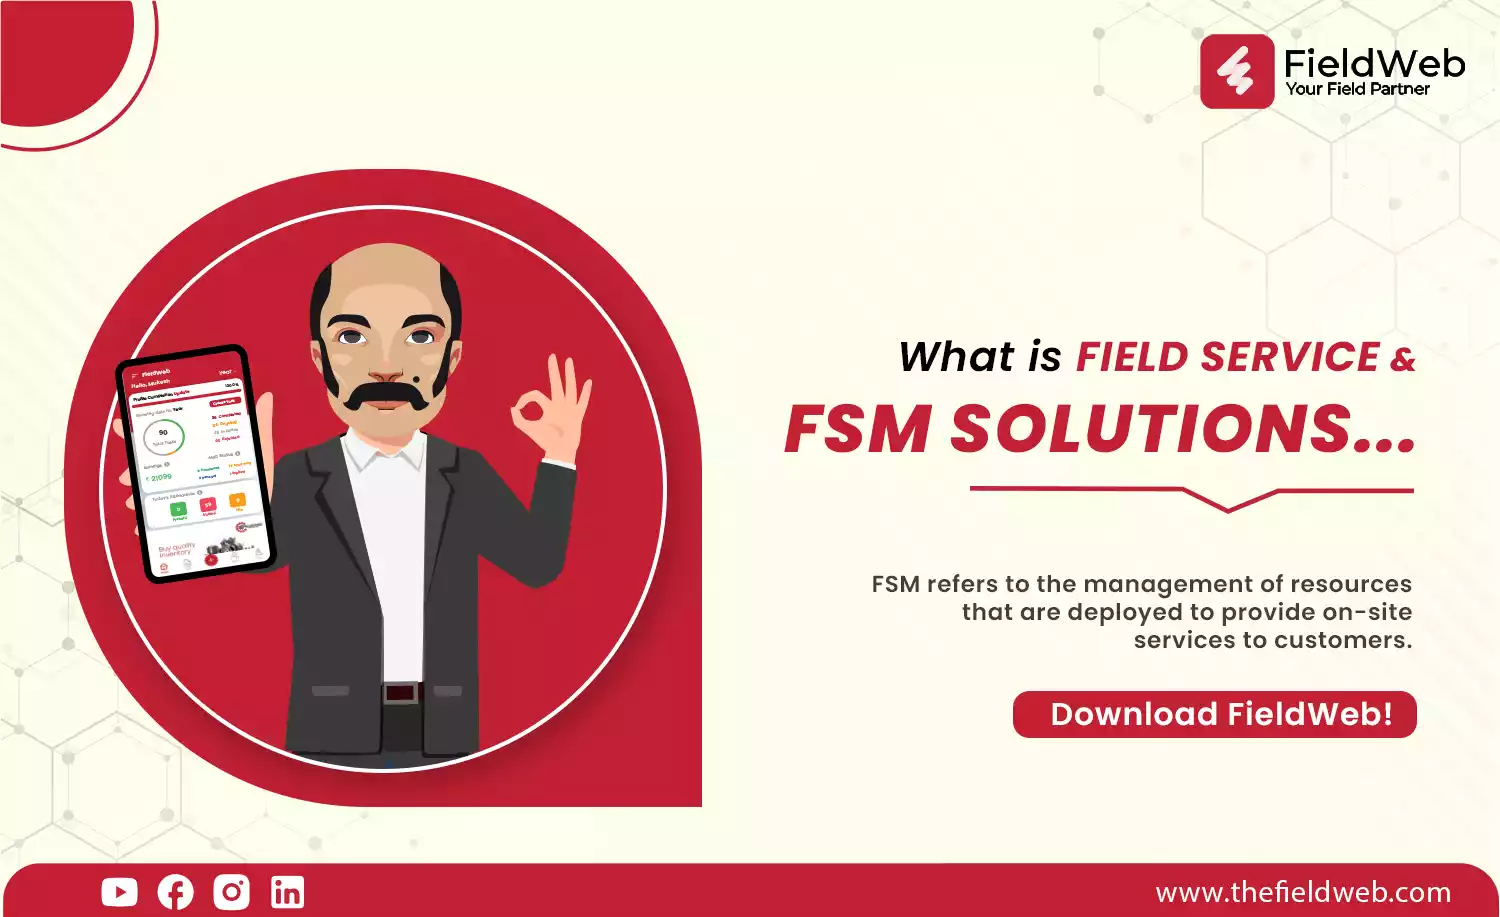 image is displaying how FSM software help field service businesses to operating their business in streamline